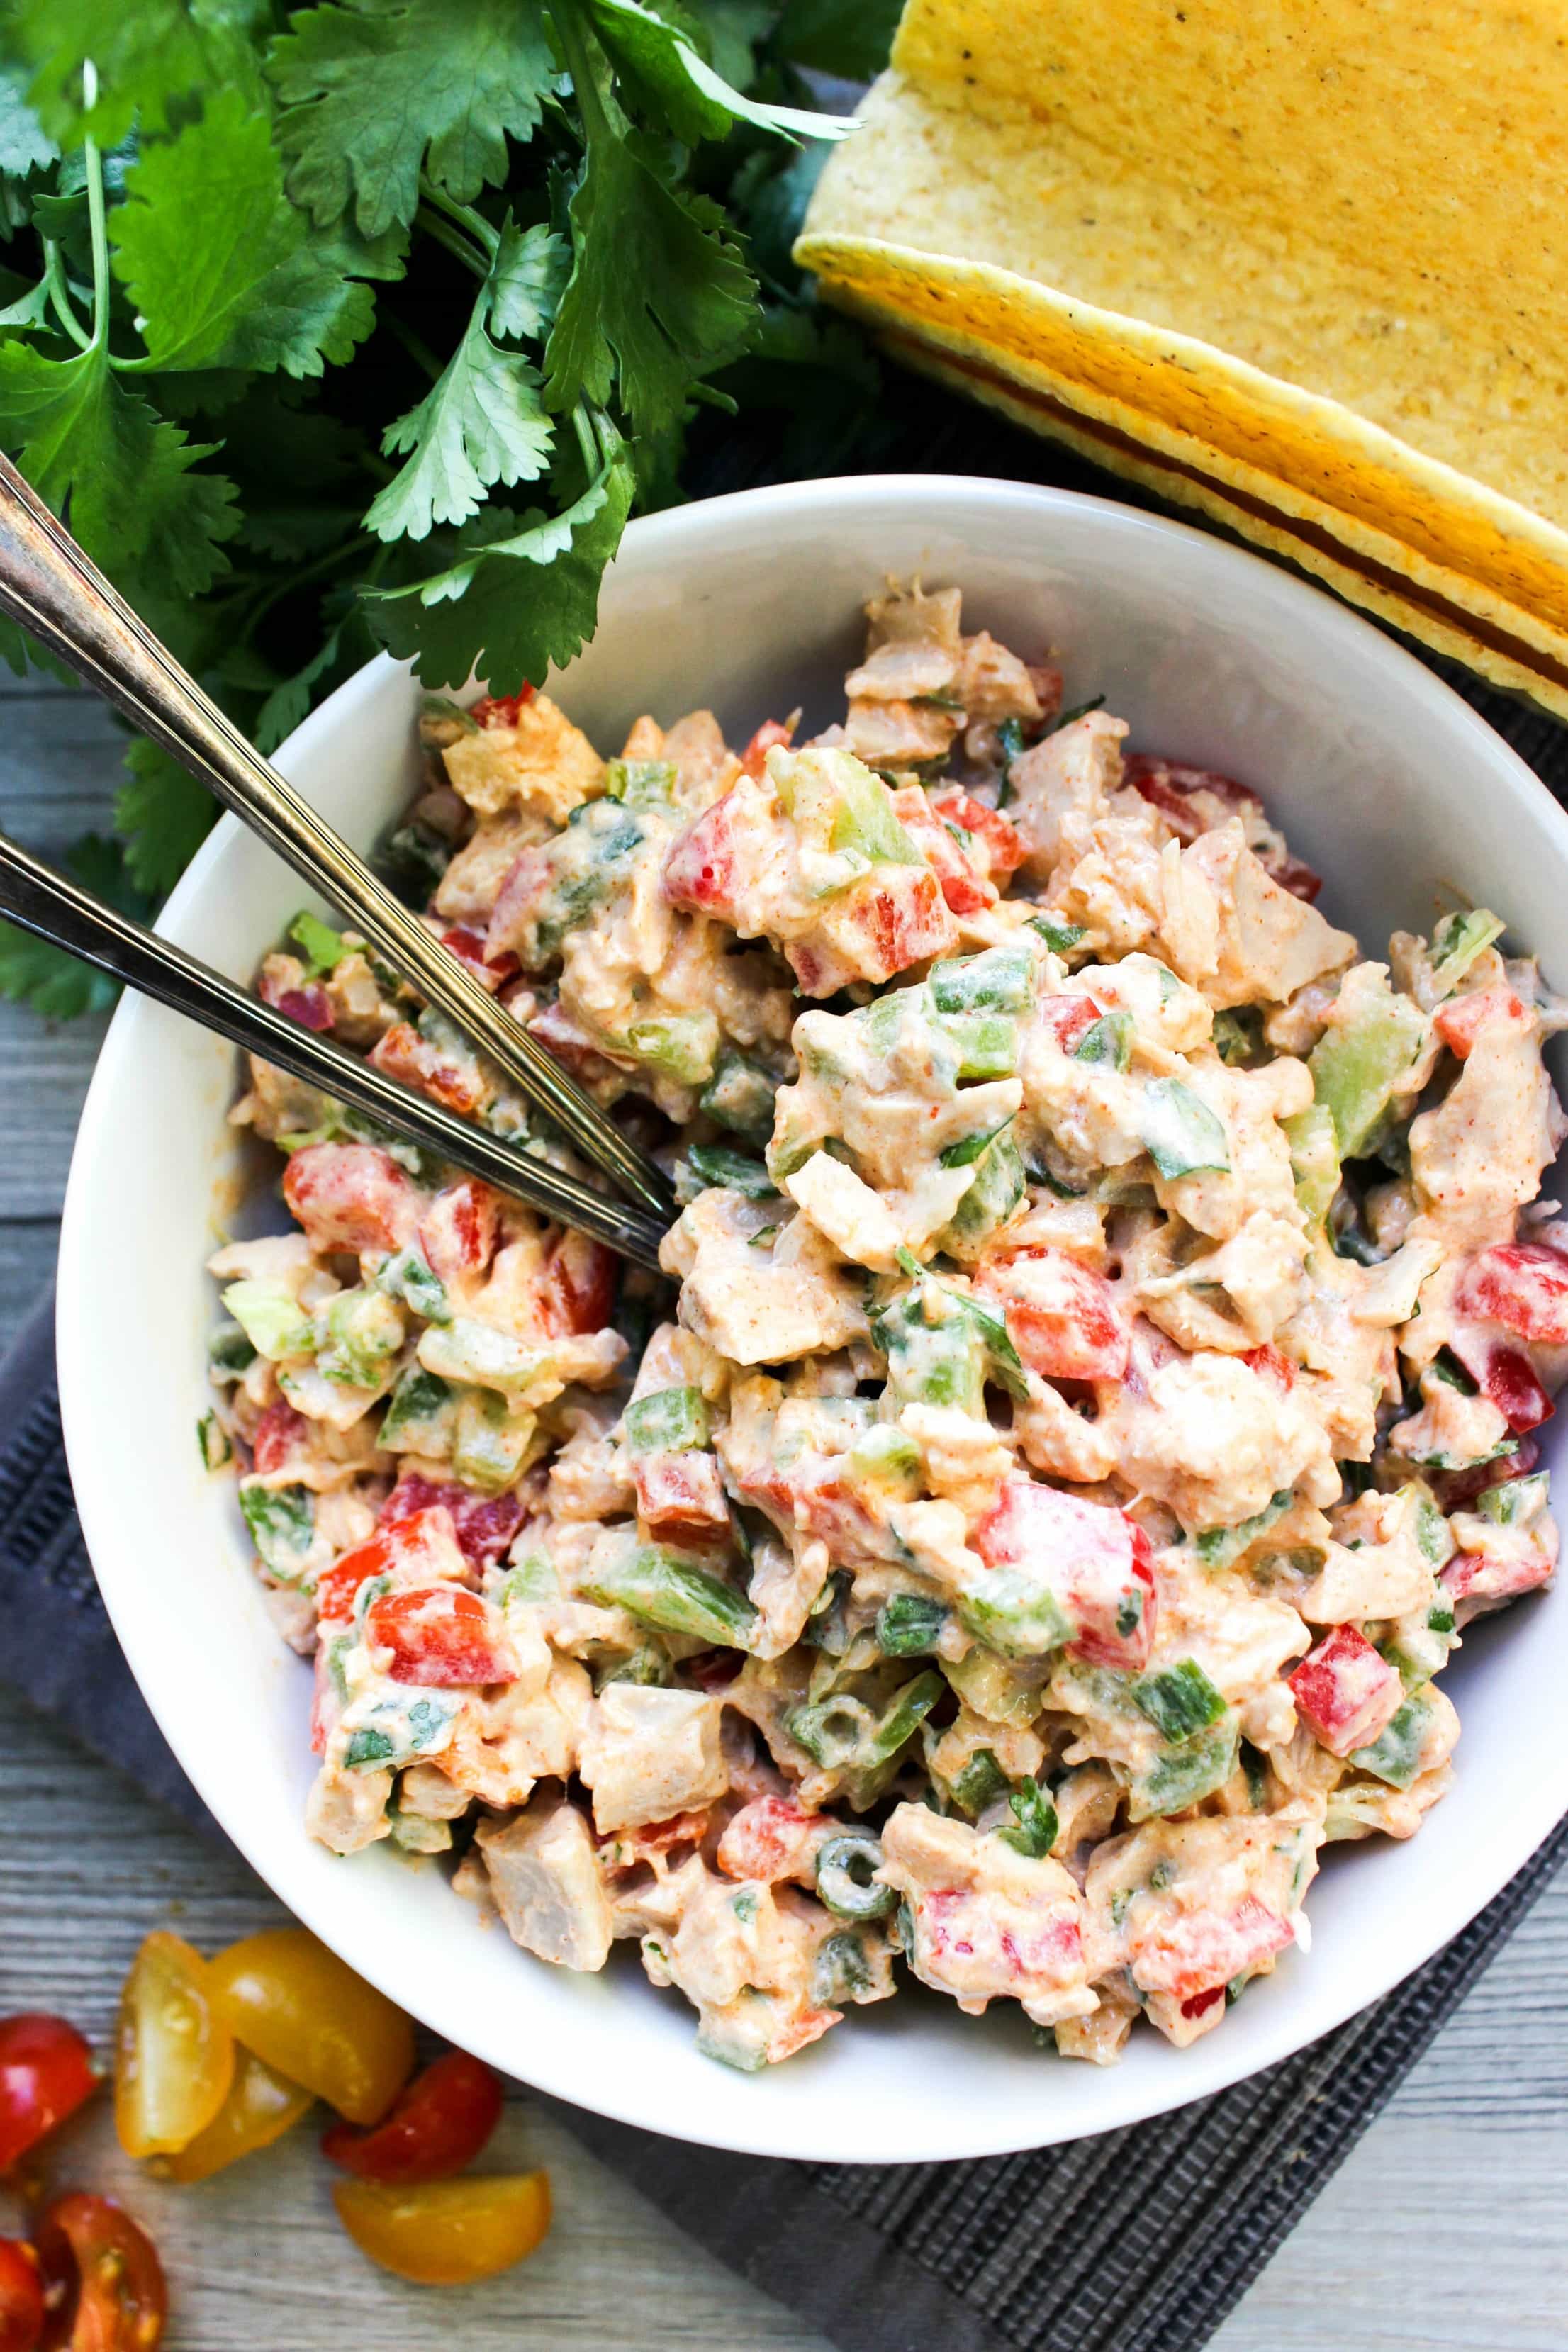 This Santa Fe Chicken Salad is a flavorful chicken salad recipe that's perfect for serving as a dip, in a wrap, as a taco, or tostada.